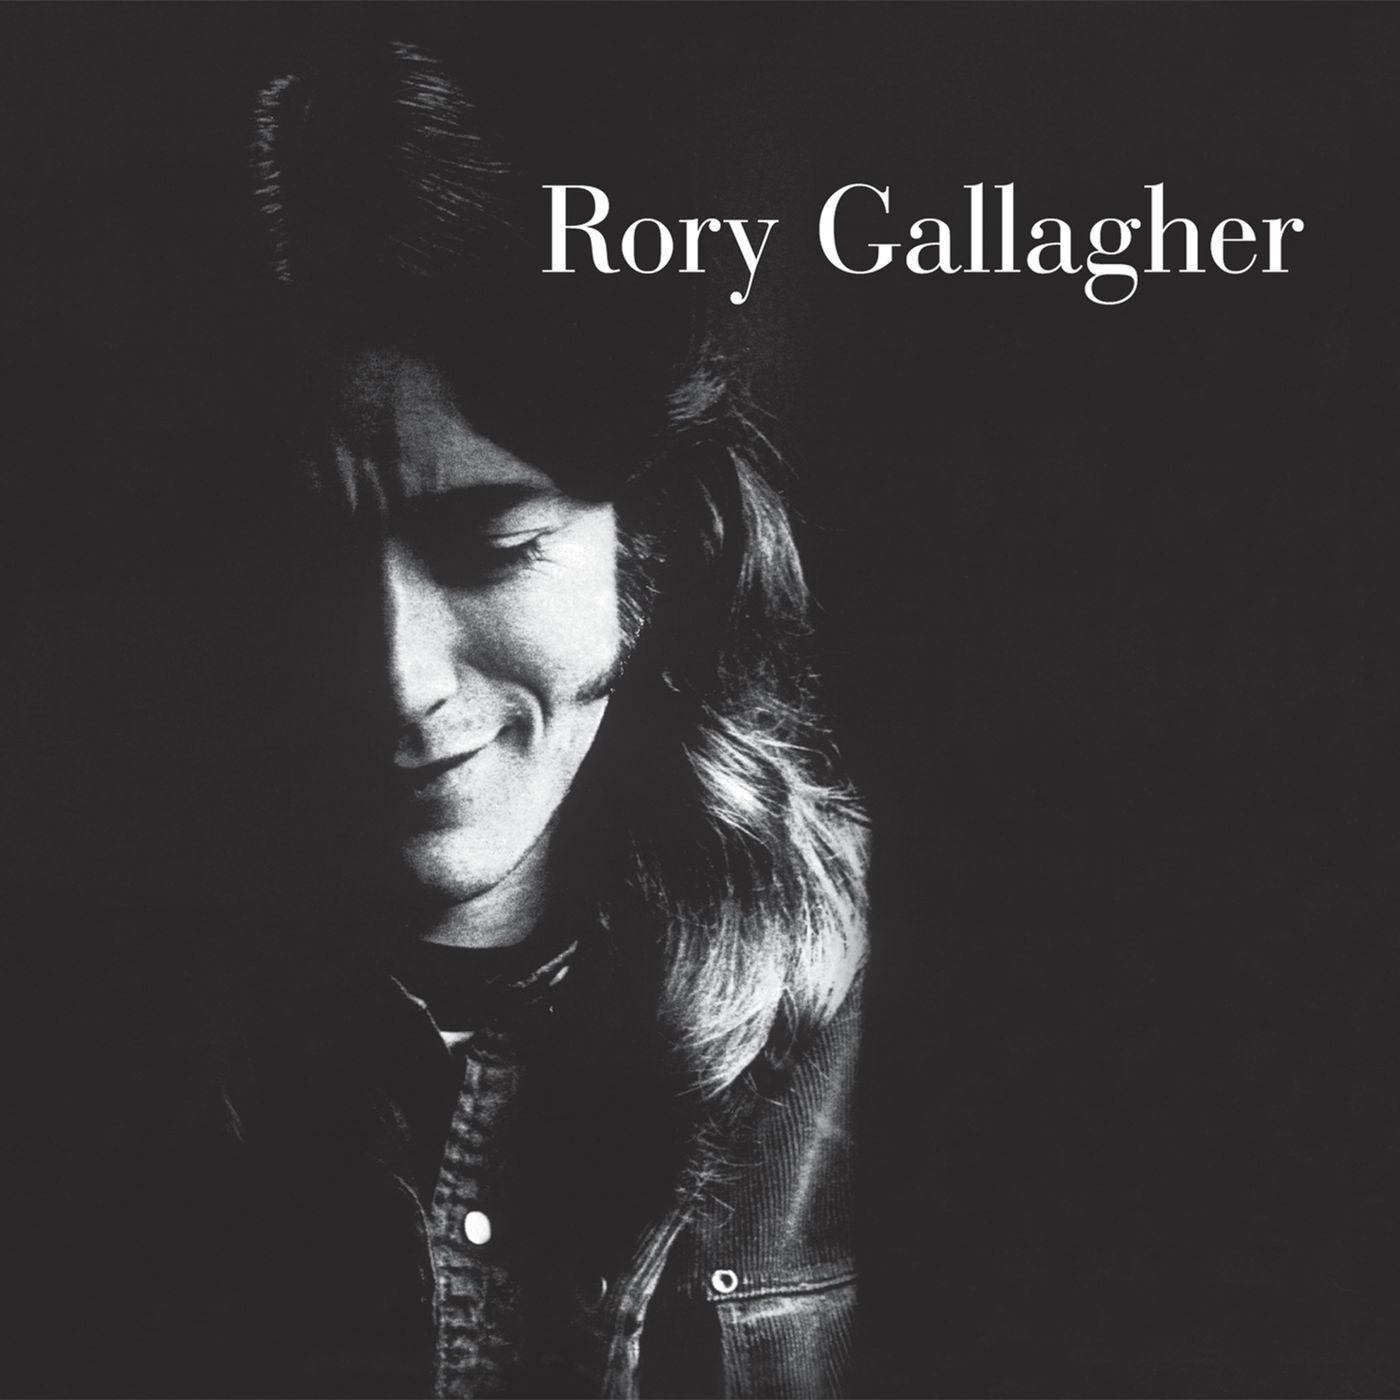 Rory Gallagher - Rory Gallagher (Remastered) (1971/2020) [FLAC 24bit/96kHz]